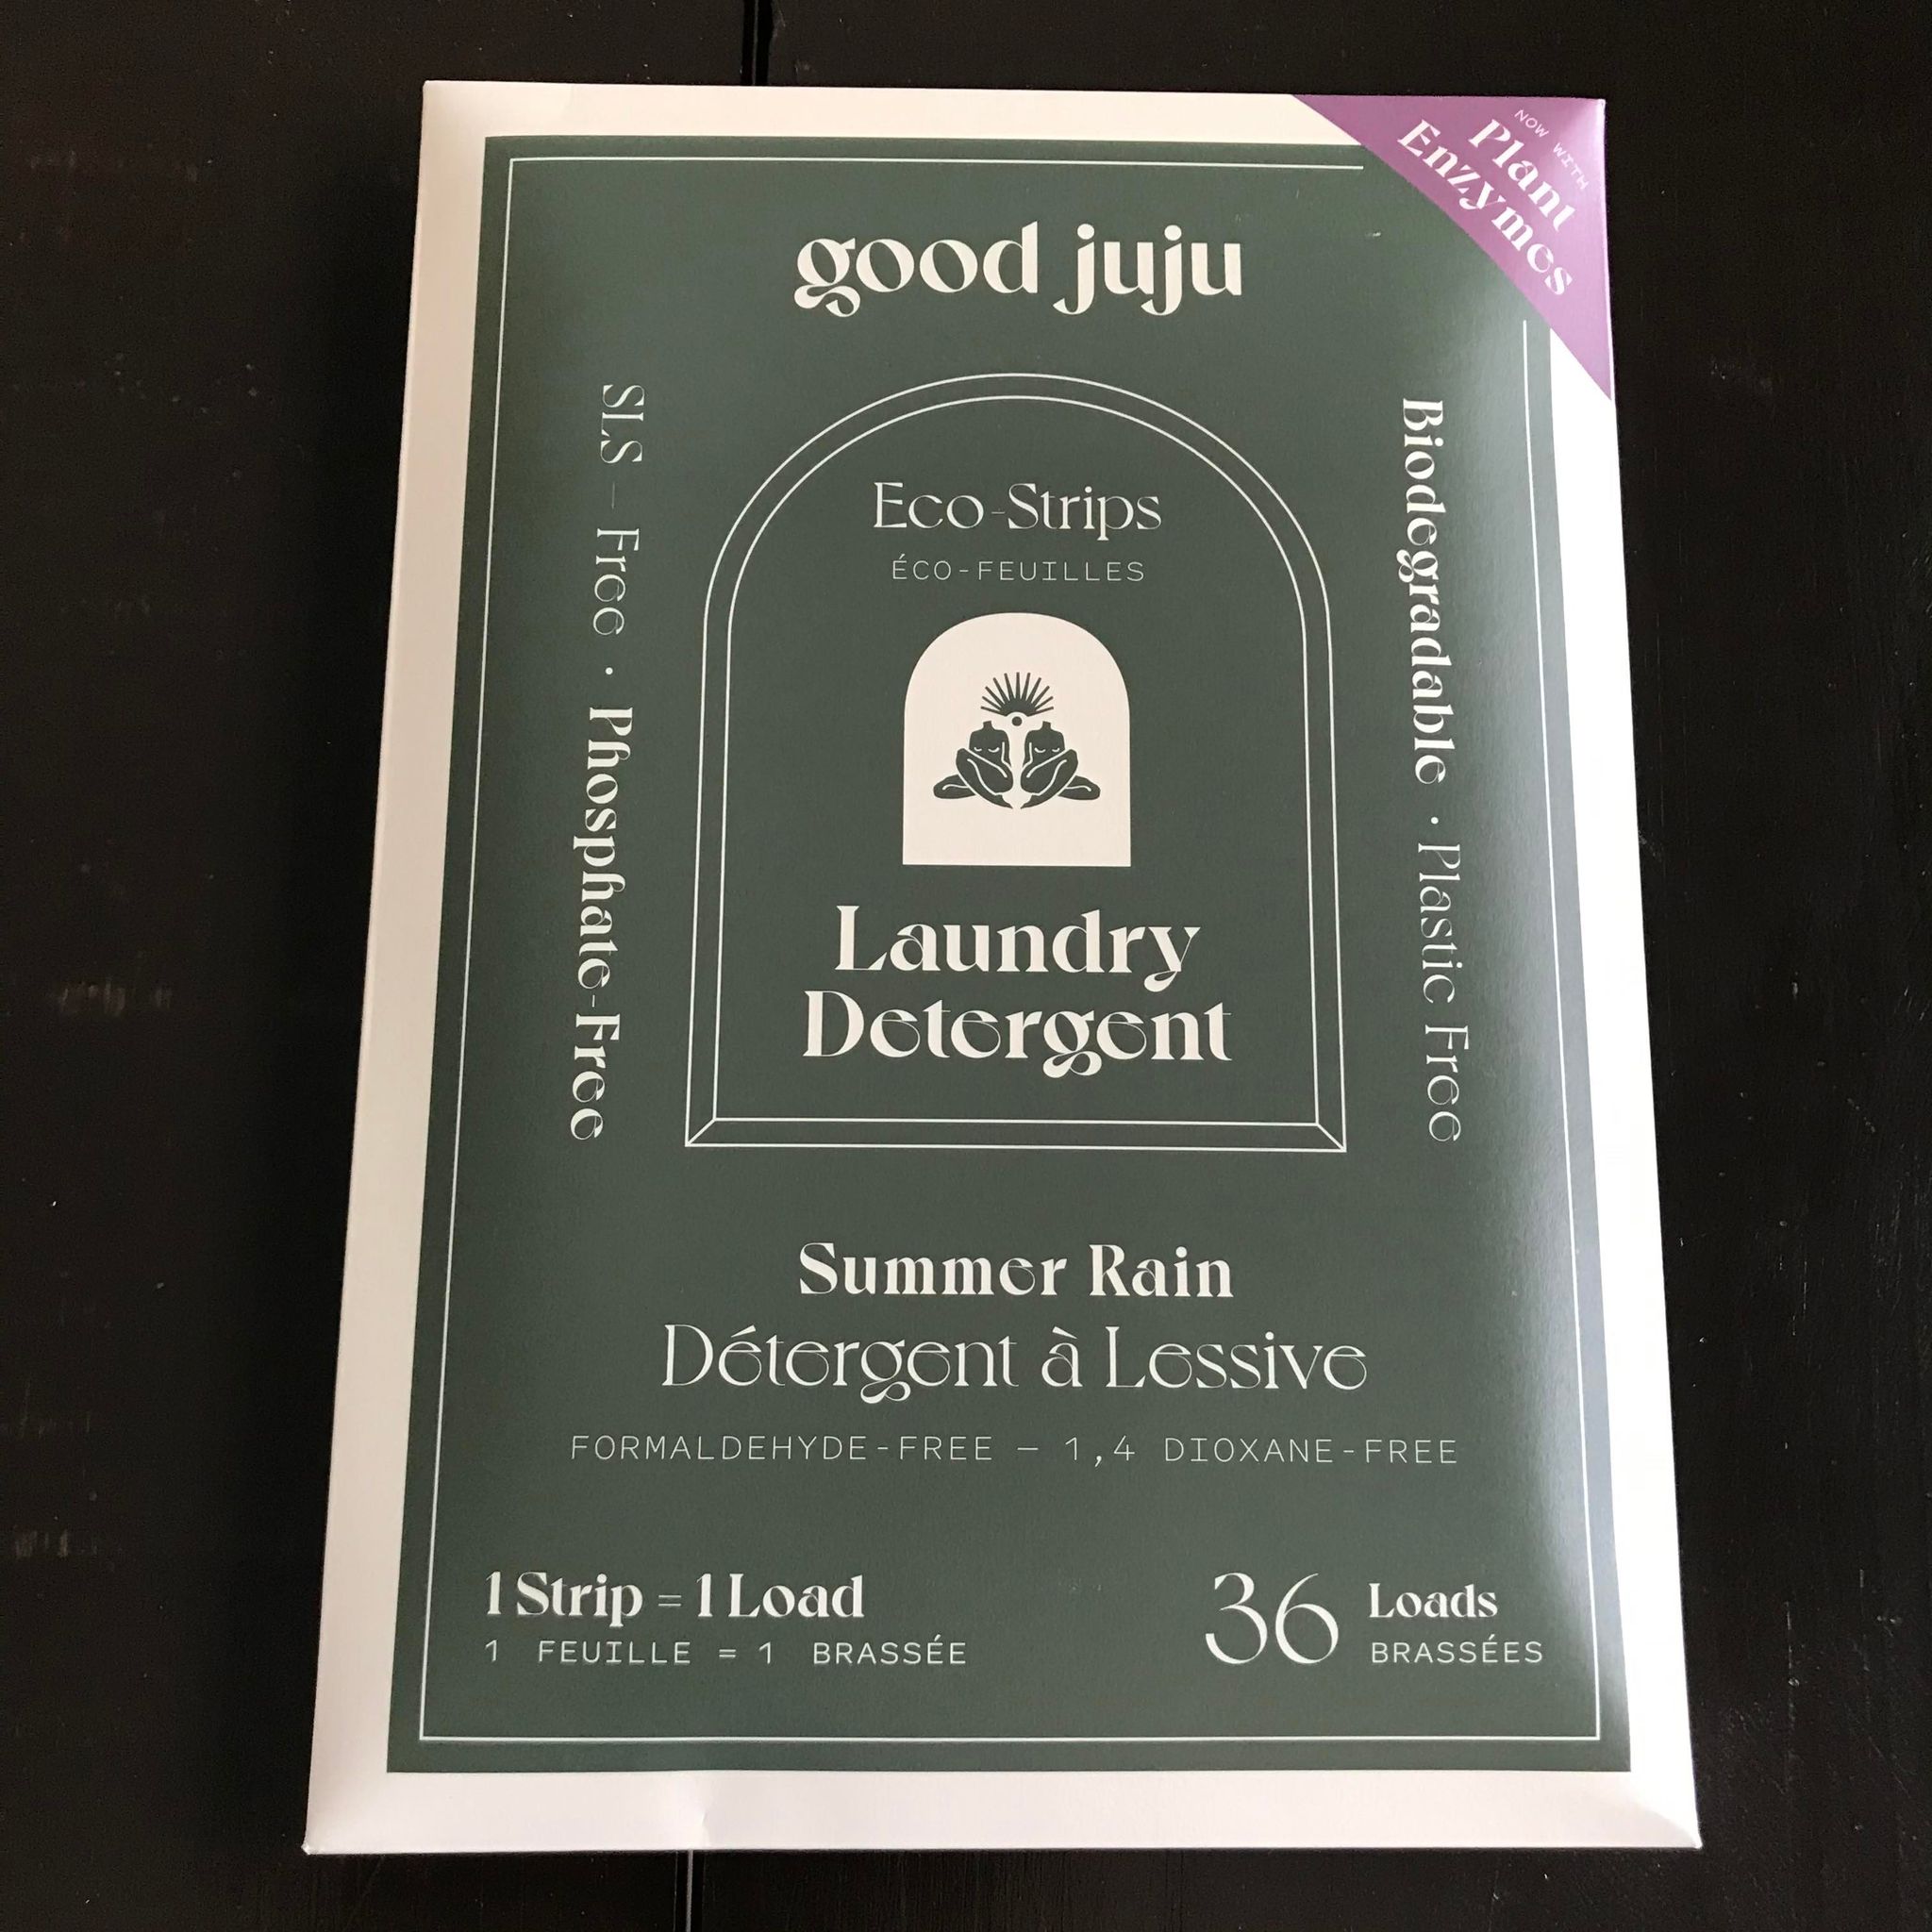 Canadian made Good Juju summer rain 36 load laundry detergent eco strips in compostable packaging